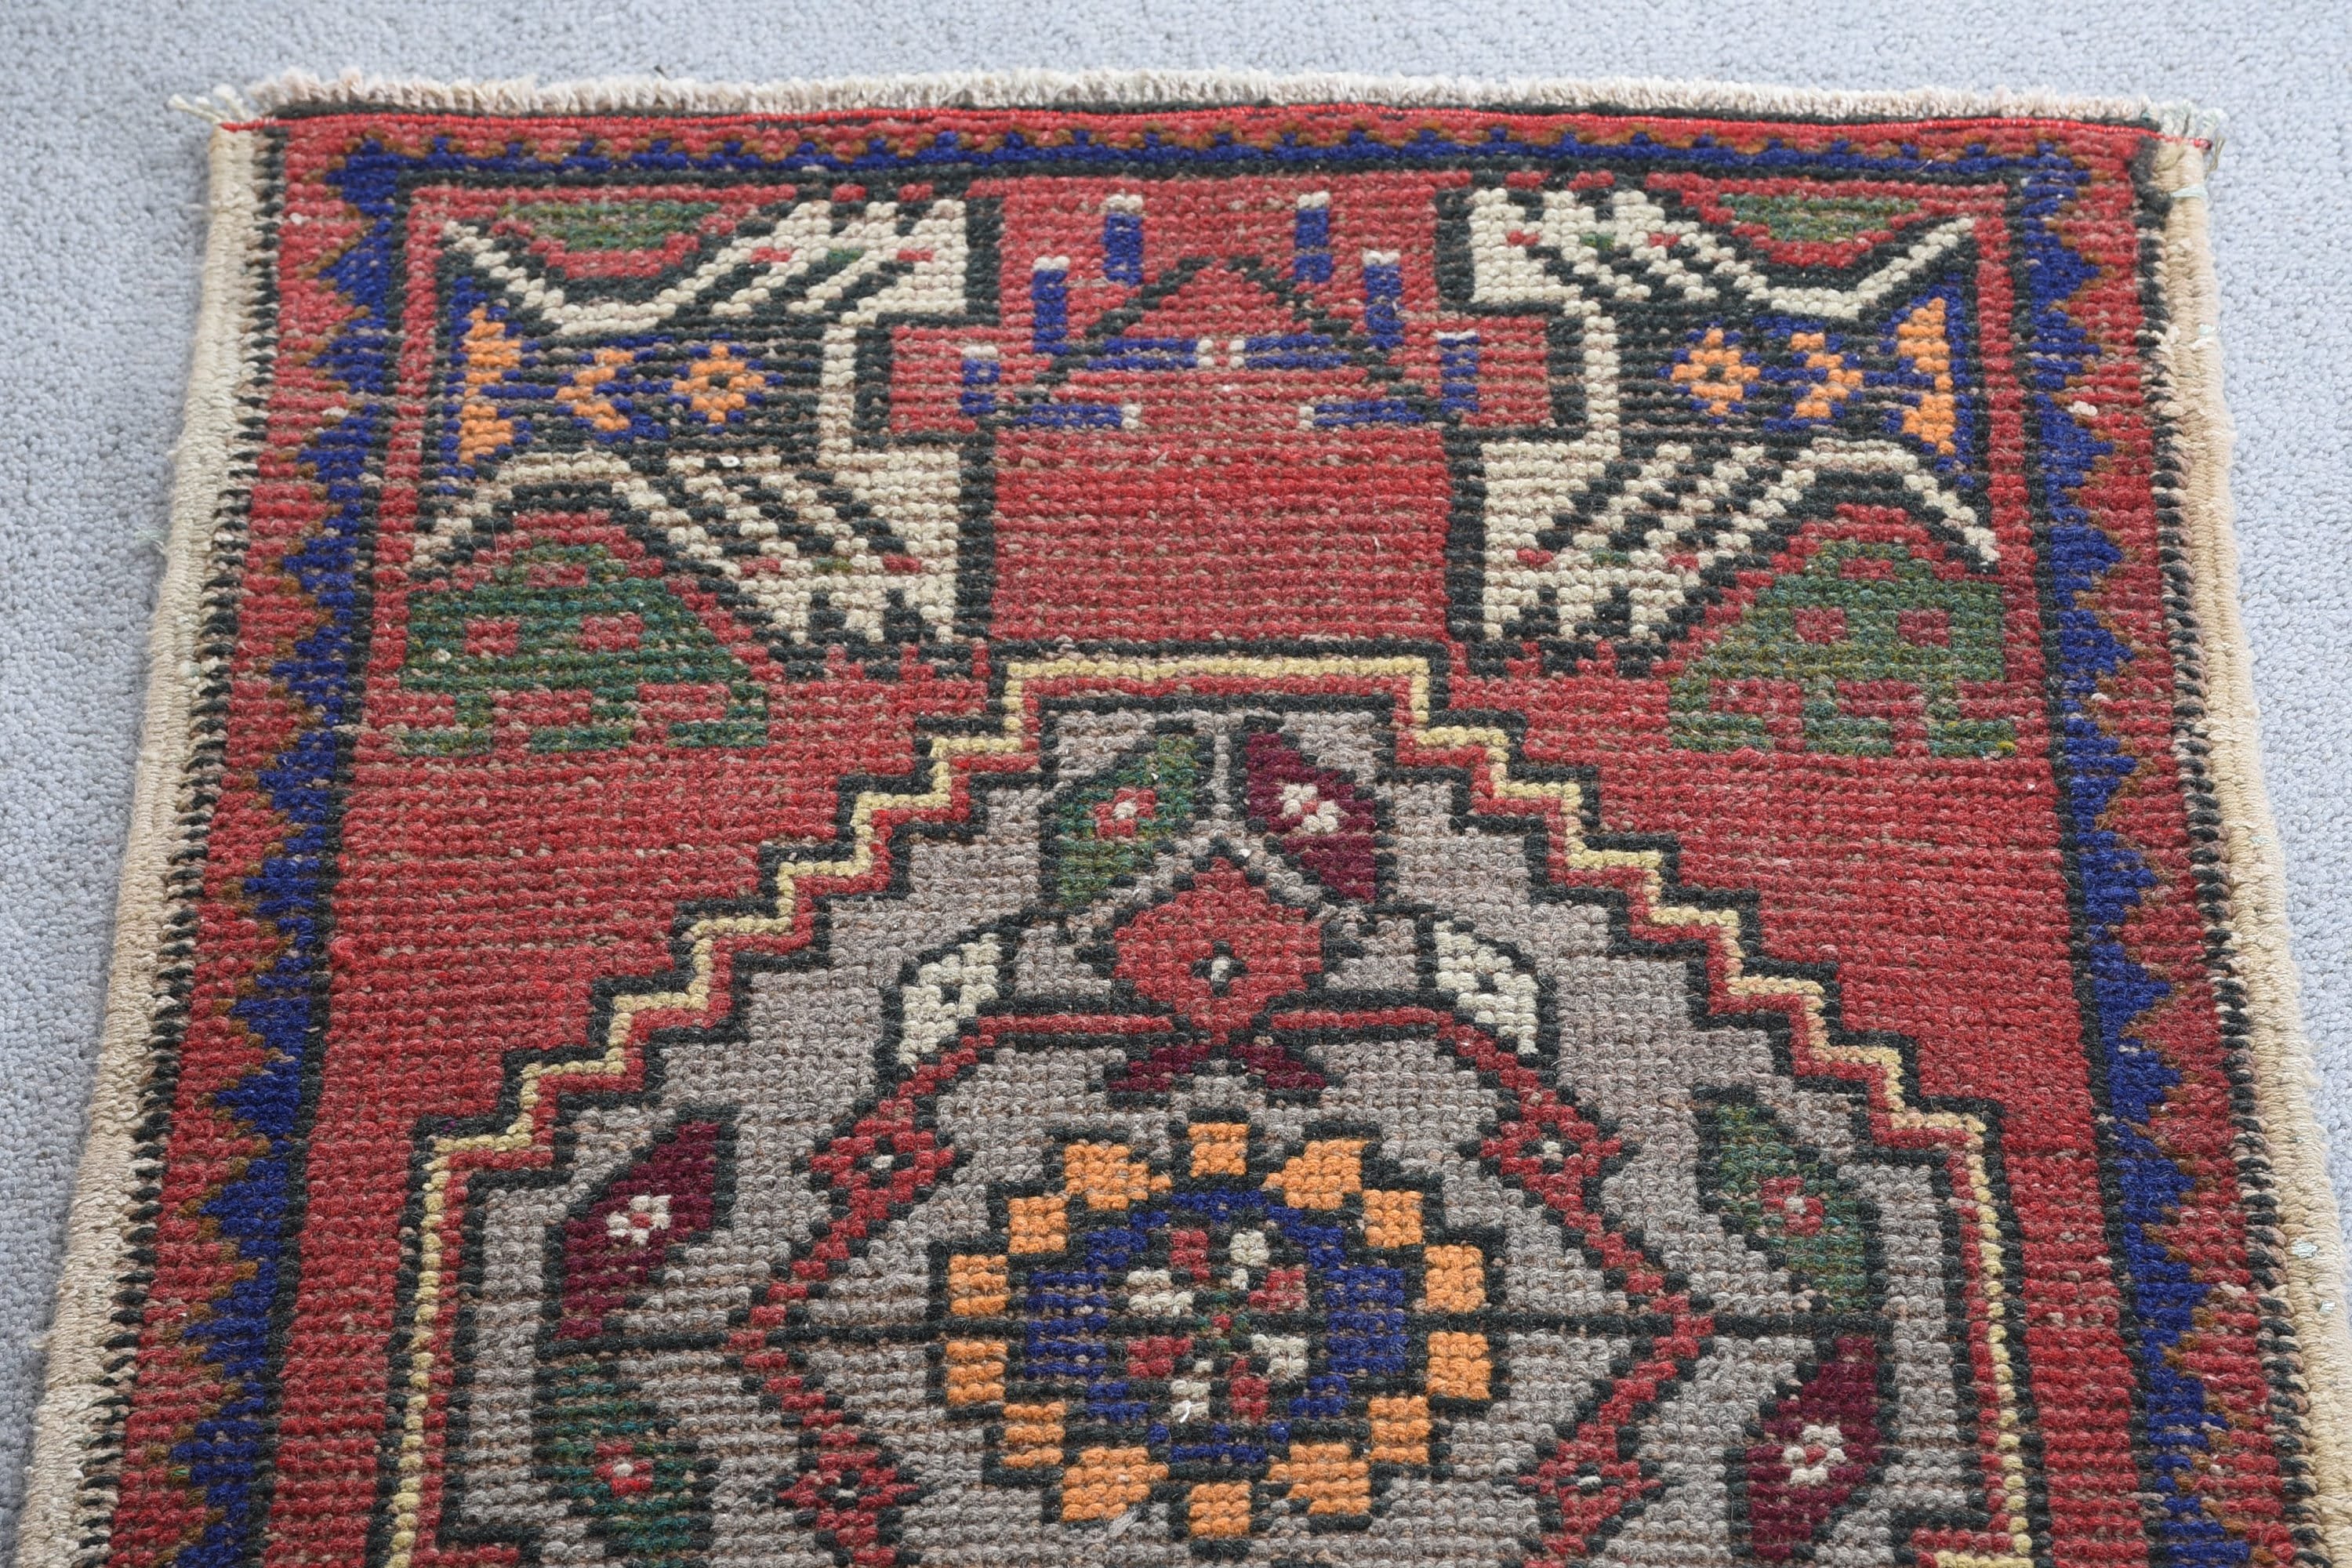 Turkish Rugs, Red Oushak Rug, Vintage Rug, Oushak Rugs, Wall Hanging Rug, Home Decor Rug, 1.6x3.1 ft Small Rugs, Muted Rug, Door Mat Rugs